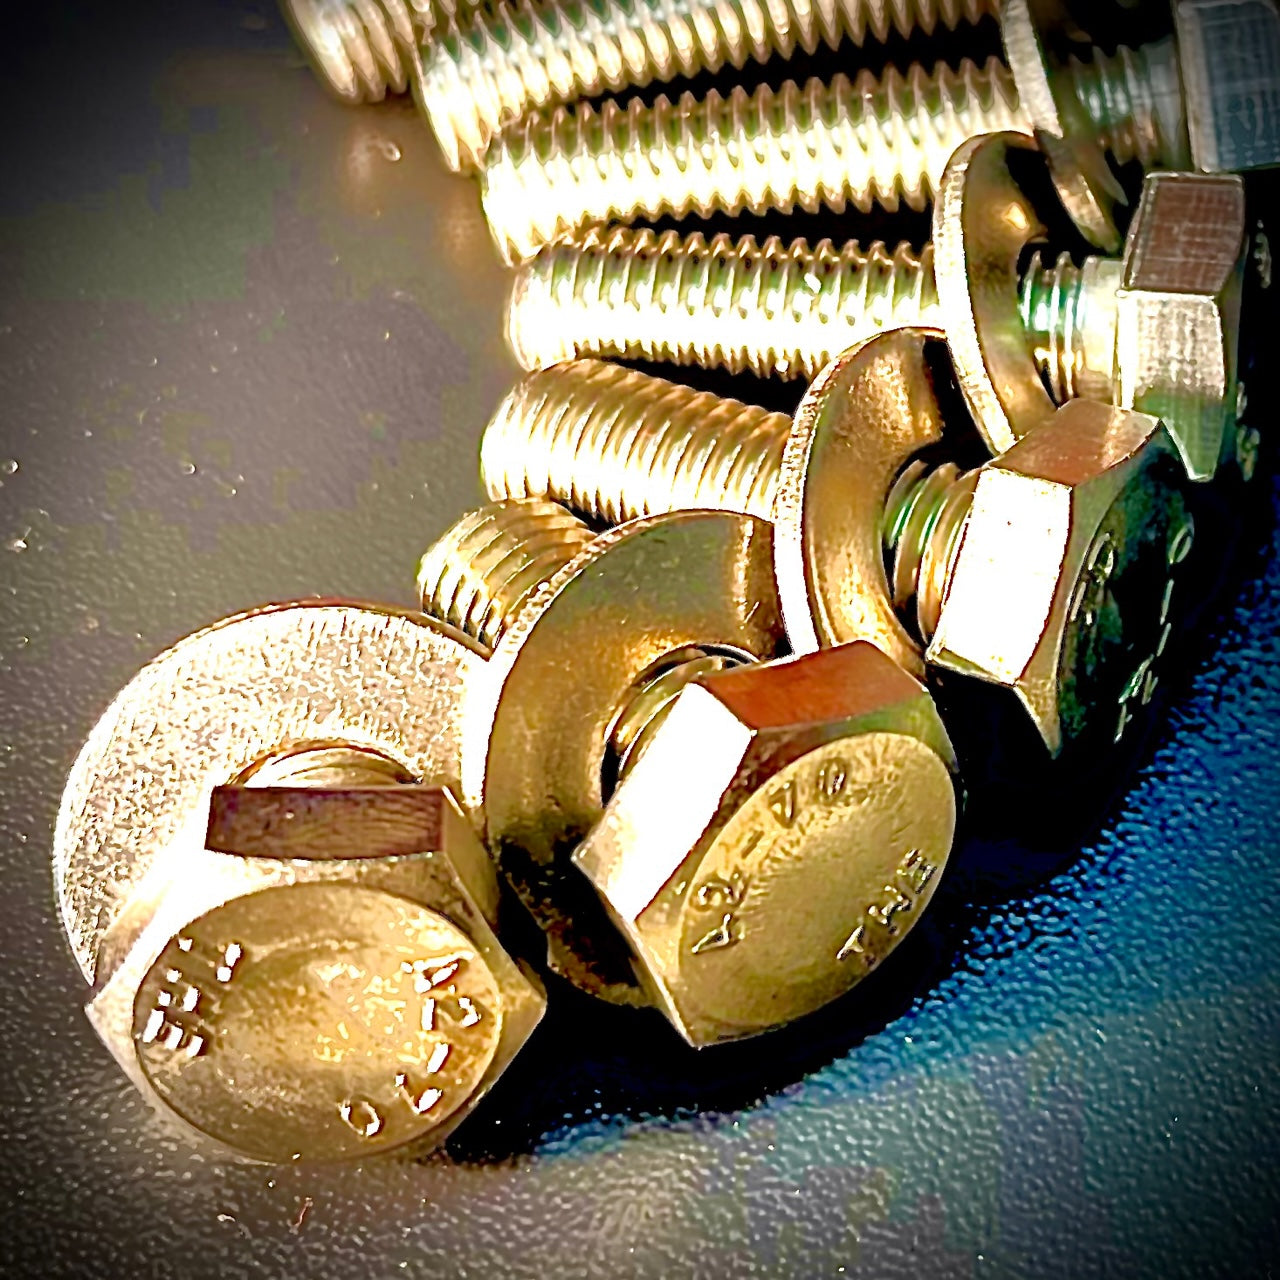 M12xUnder 50mm Hex Set Screw plus Washer A2 304 Stainless Steel - Fixaball Ltd. Fixings and Fasteners UK